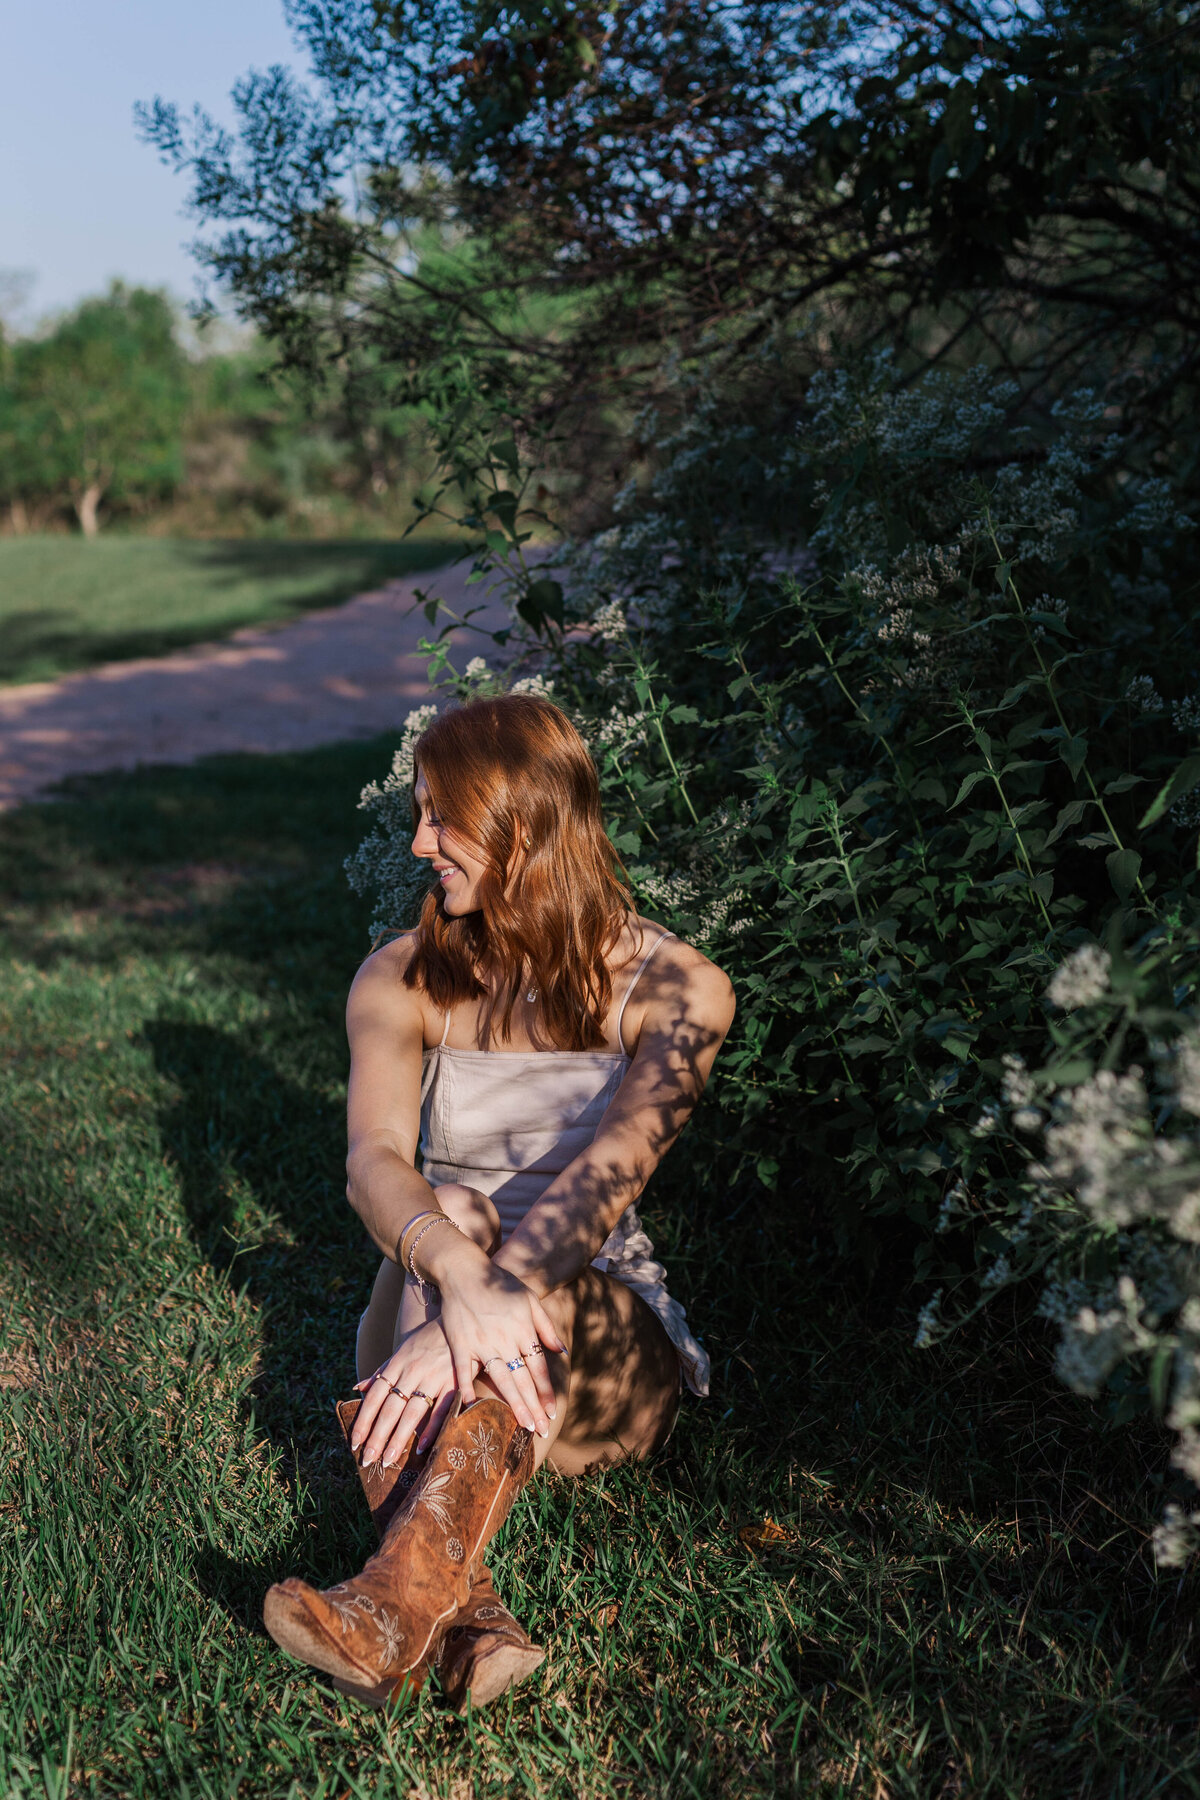 A senior girl sits in the grass while a flowery bush casts a shadow across her body